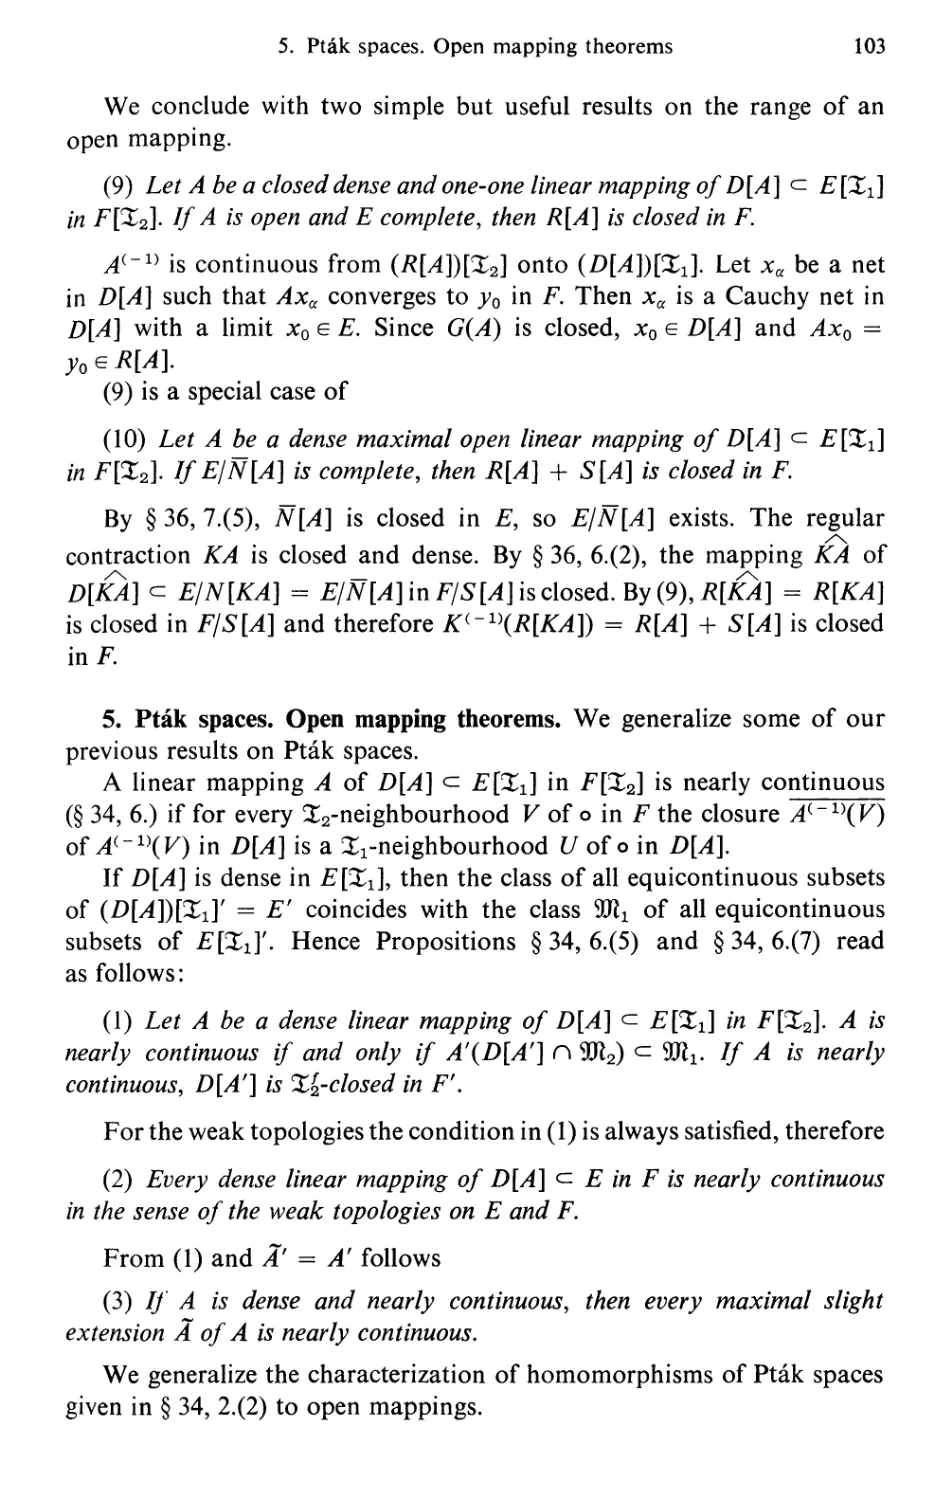 5. Pták spaces. Open mapping theorems